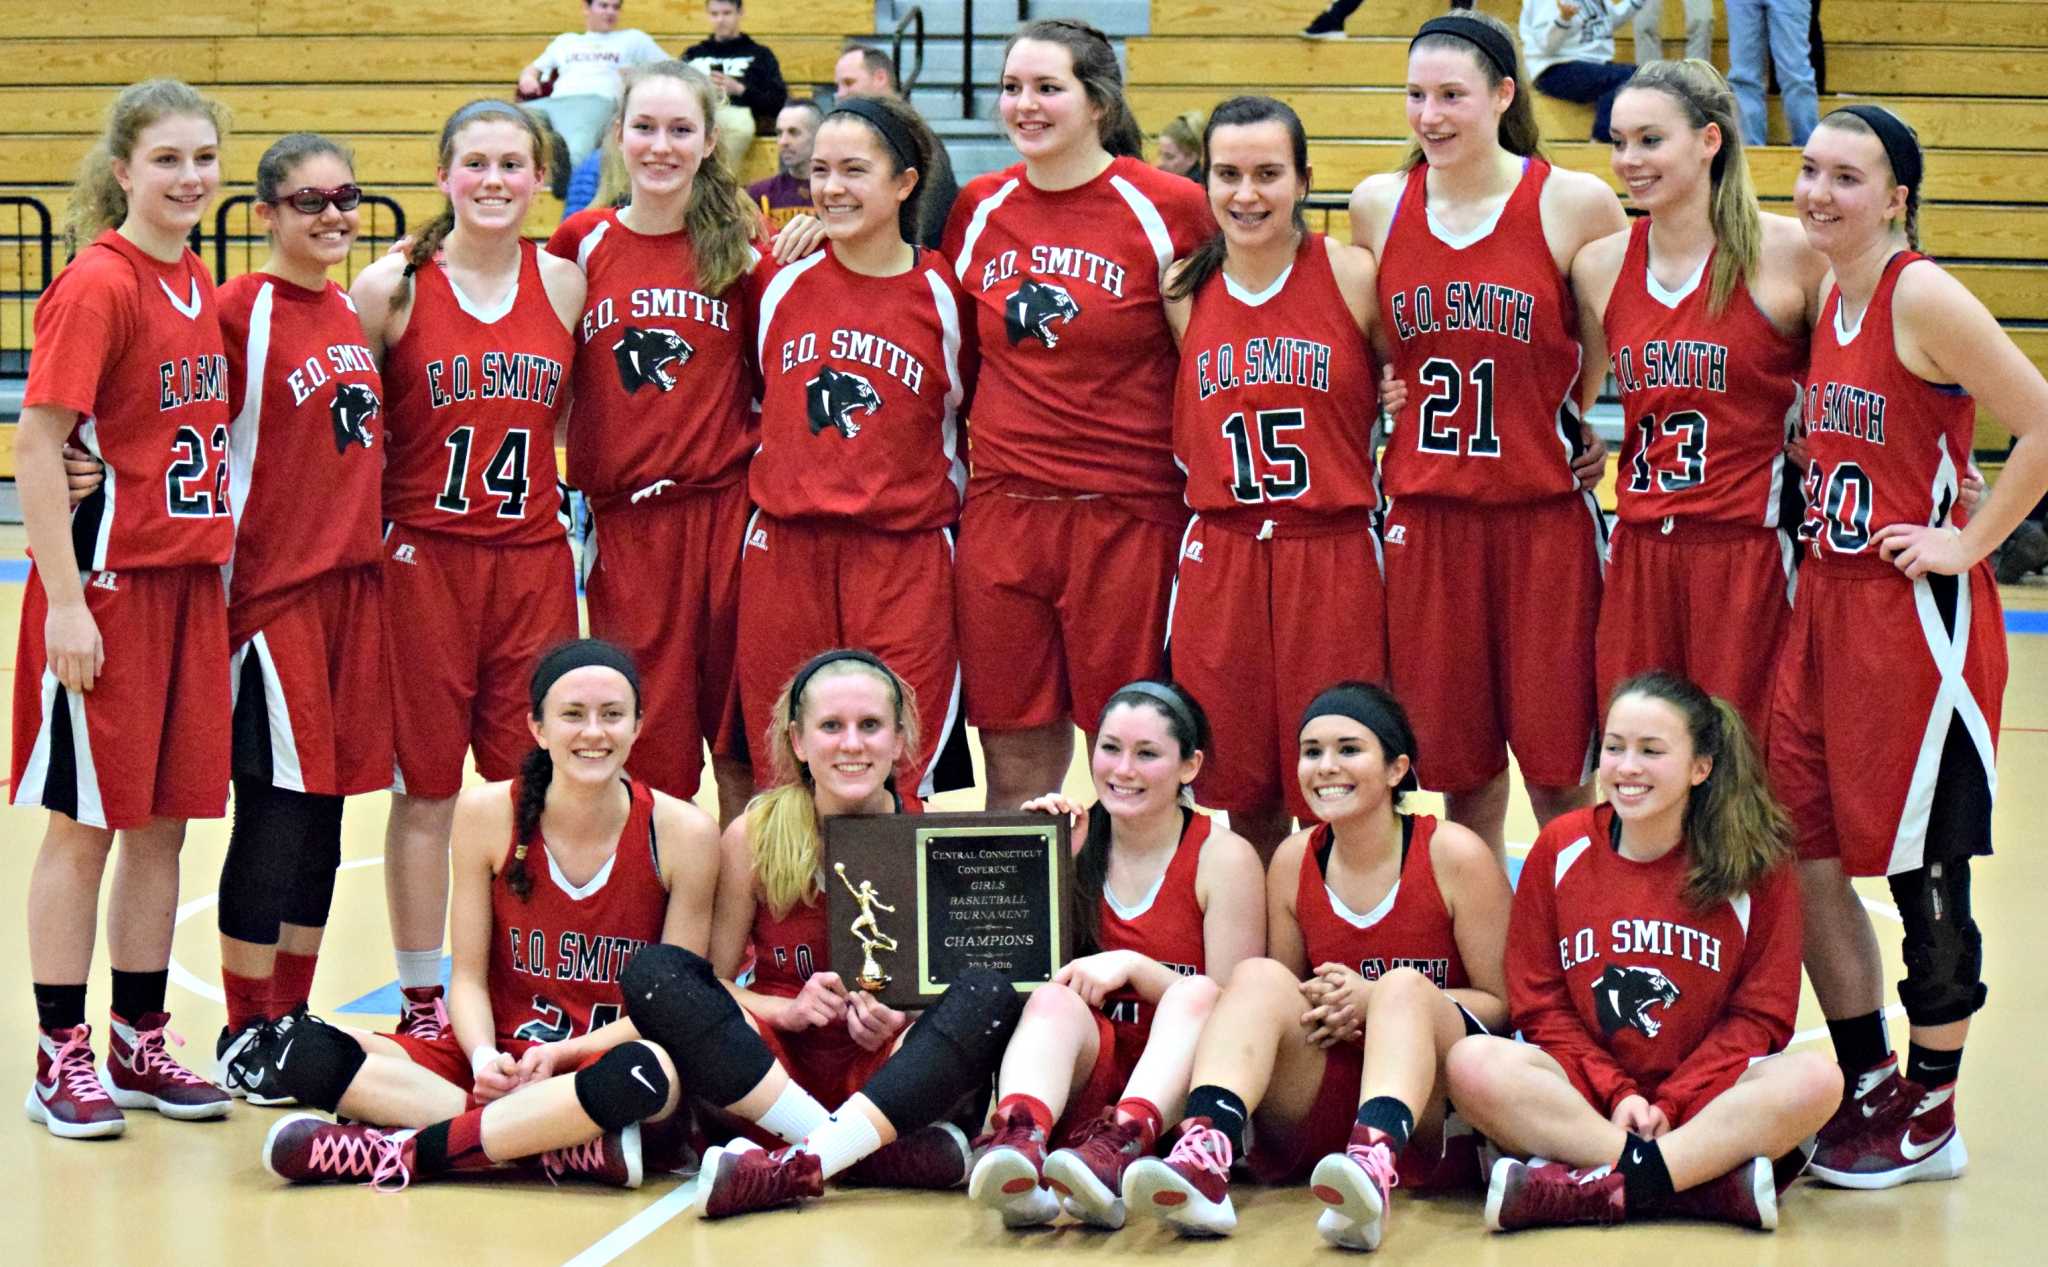 Girls Basketball Dale leads E.O. Smith to first CCC title with win